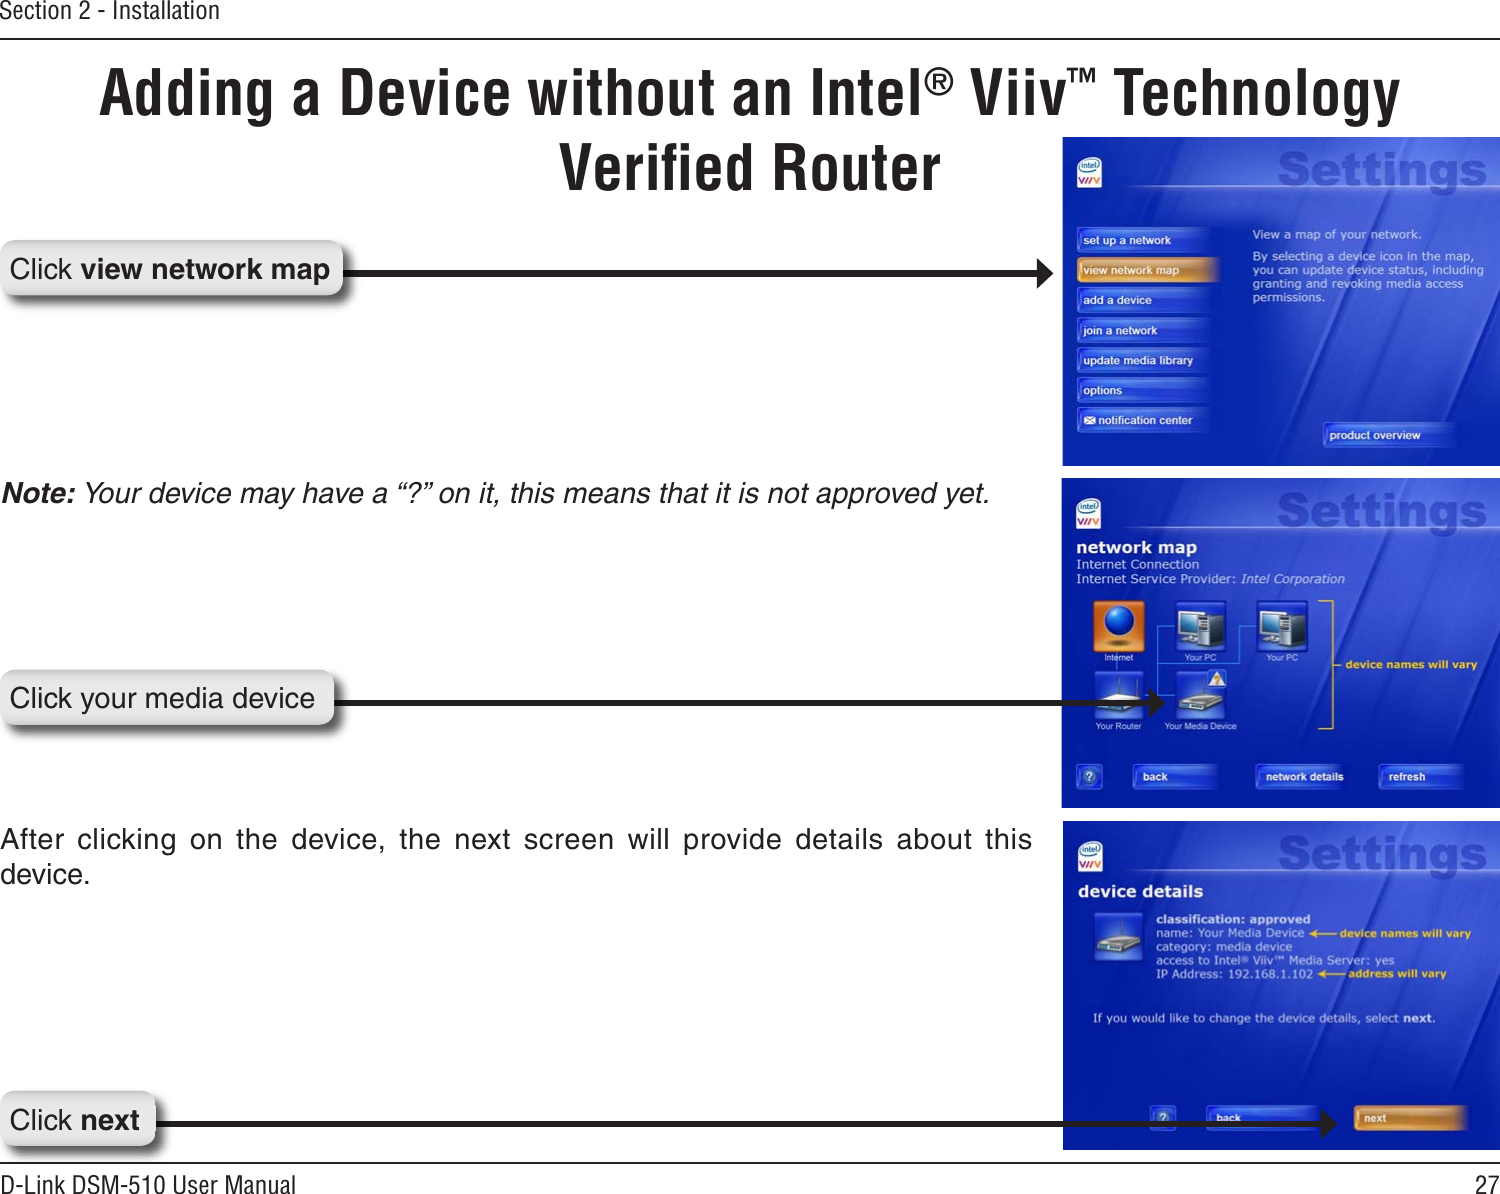 27D-Link DSM-510 User ManualSection 2 - InstallationNote: Your device may have a “?” on it, this means that it is not approved yet.After  clicking  on  the  device,  the  next  screen  will  provide  details  about  this device.Adding a Device without an Intel® Viiv™ Technology Veriﬁed RouterClick nextClick your media deviceClick view network map